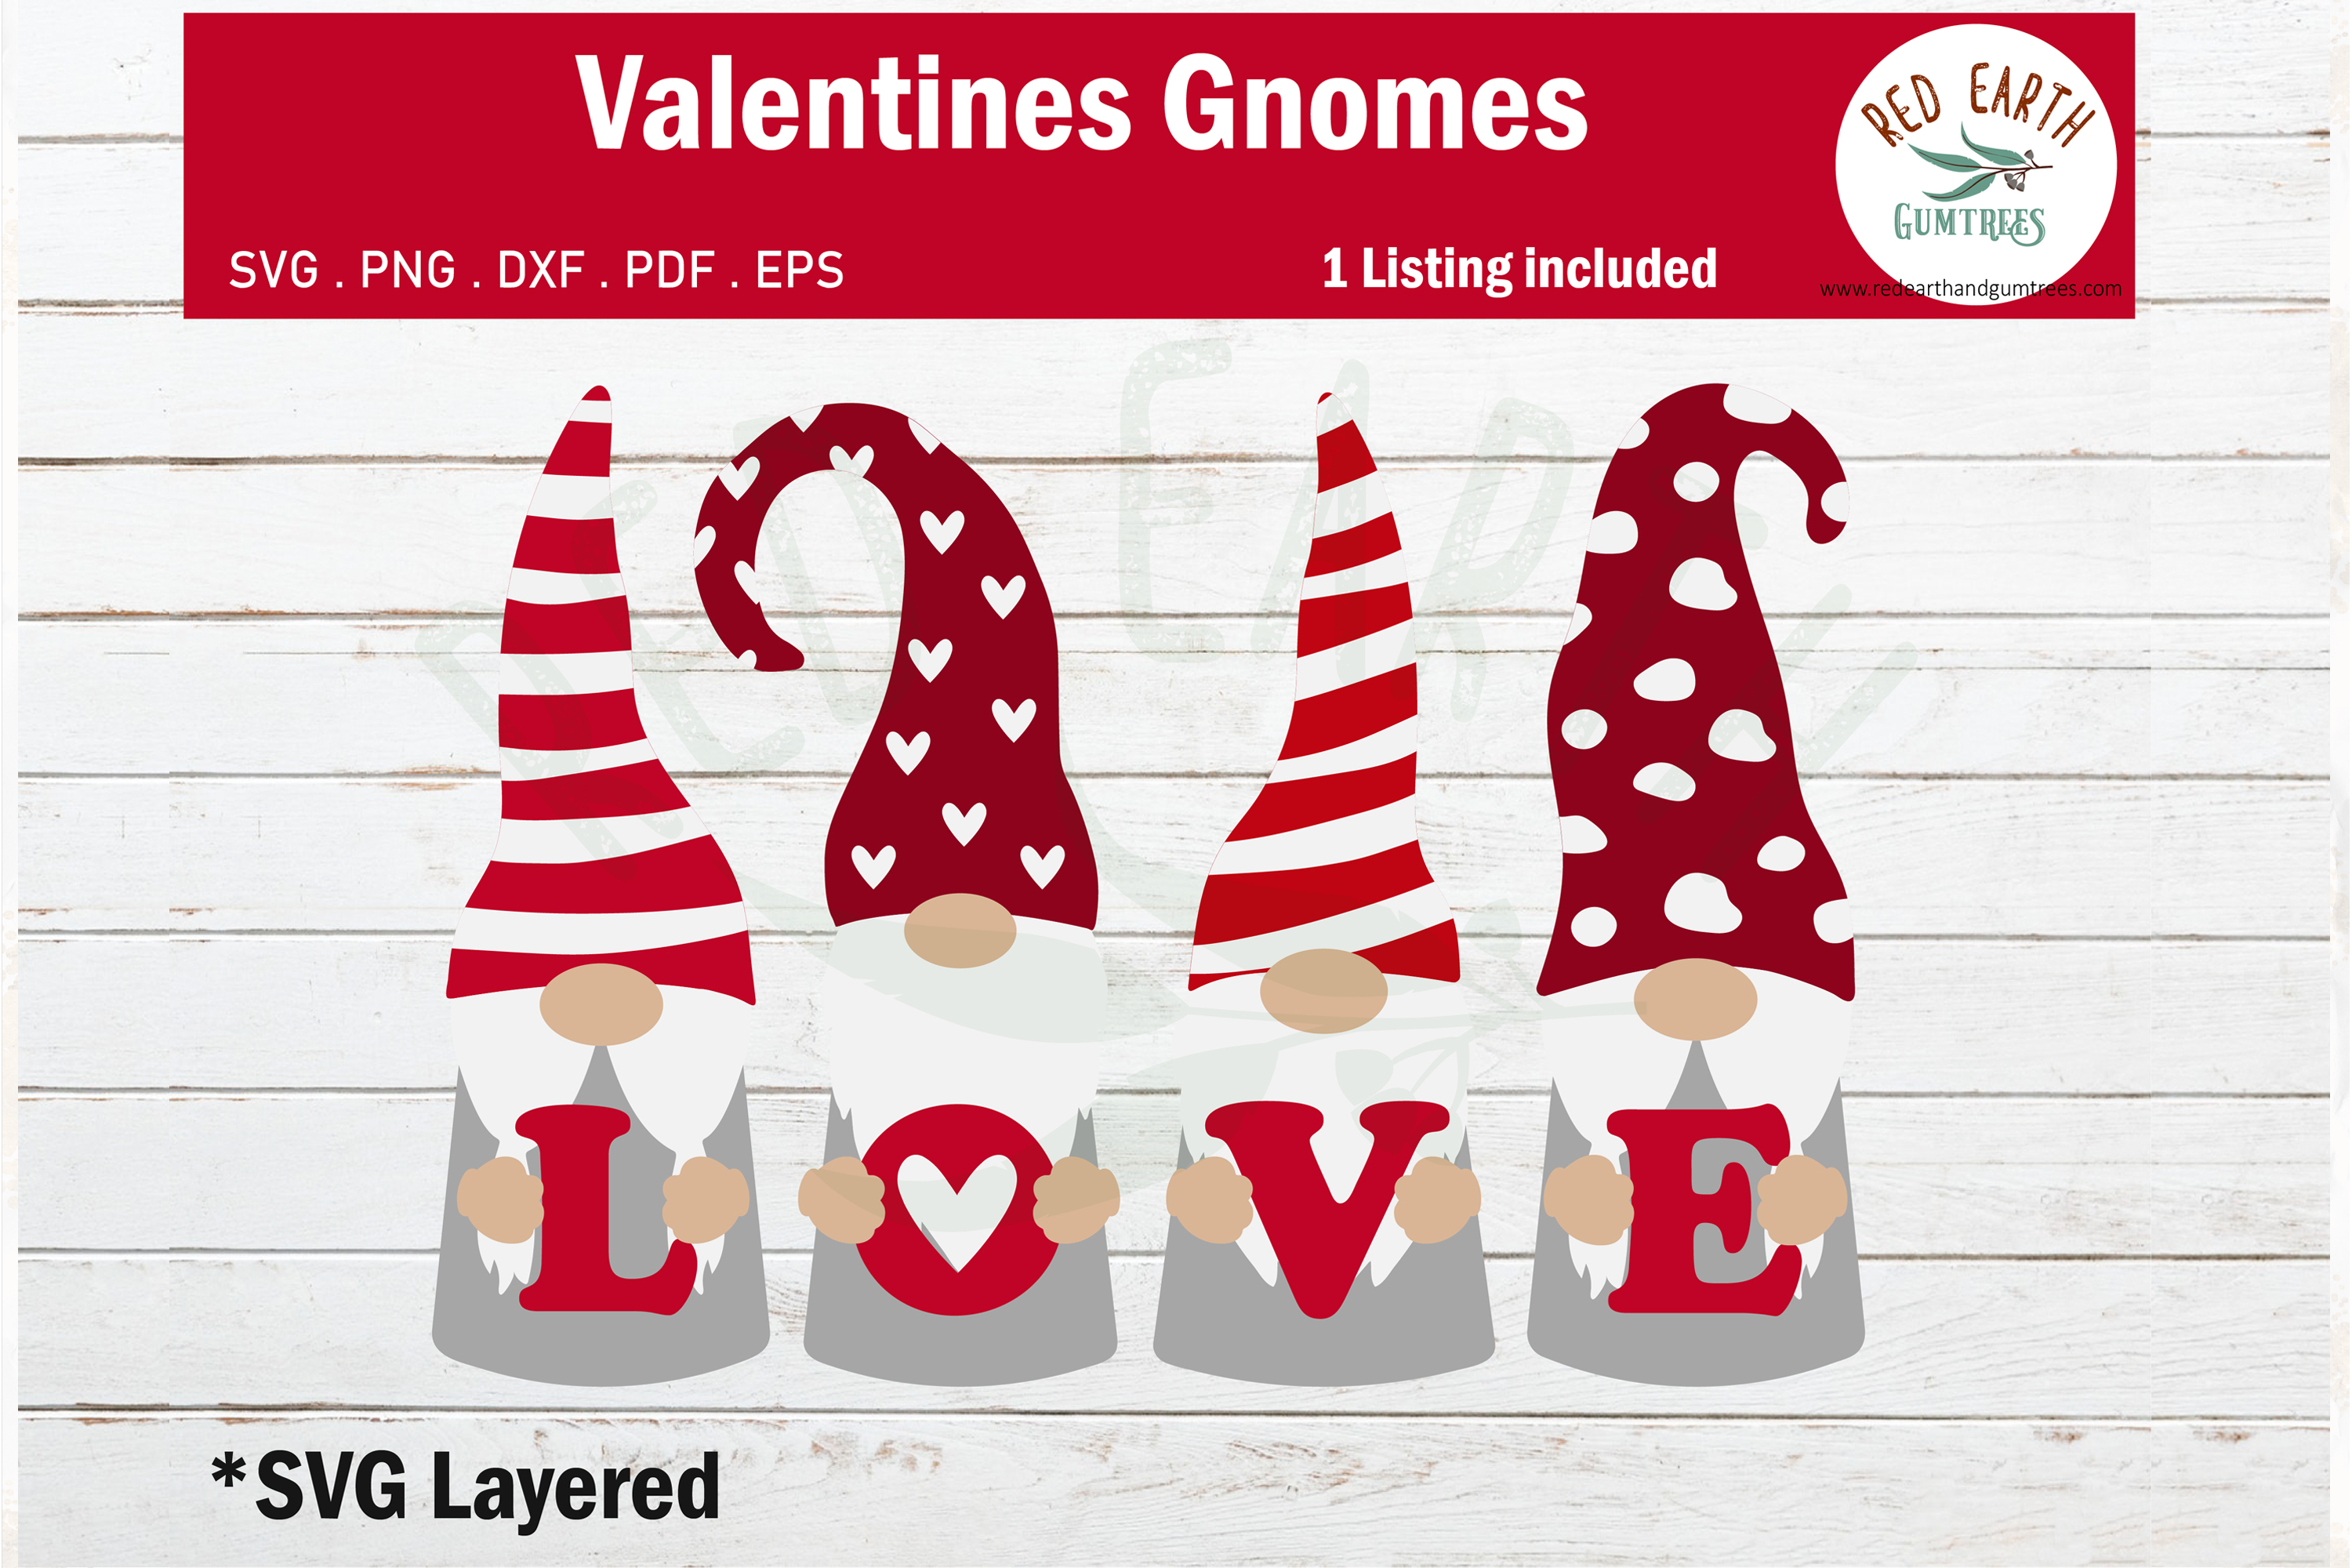 Valentines day gnome holding love heart SVG,PNG,DXF,EPS,PDF